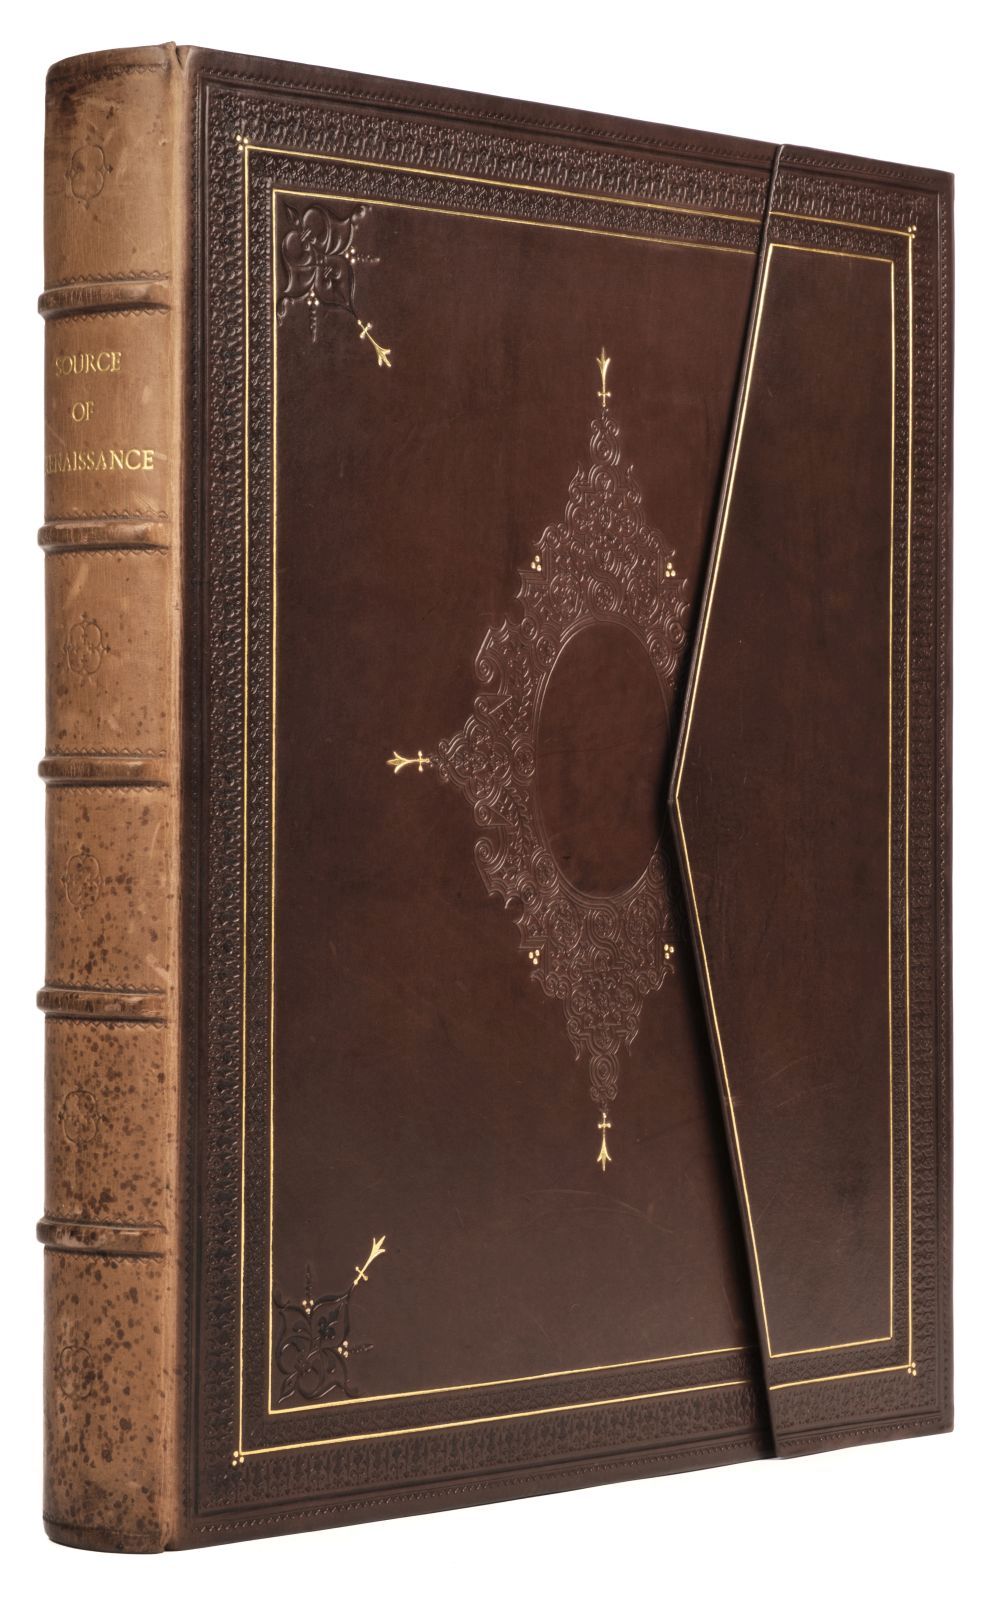 * Binding. A specimen binding by Zaehnsdorf, containing blank leaves, late 20th century